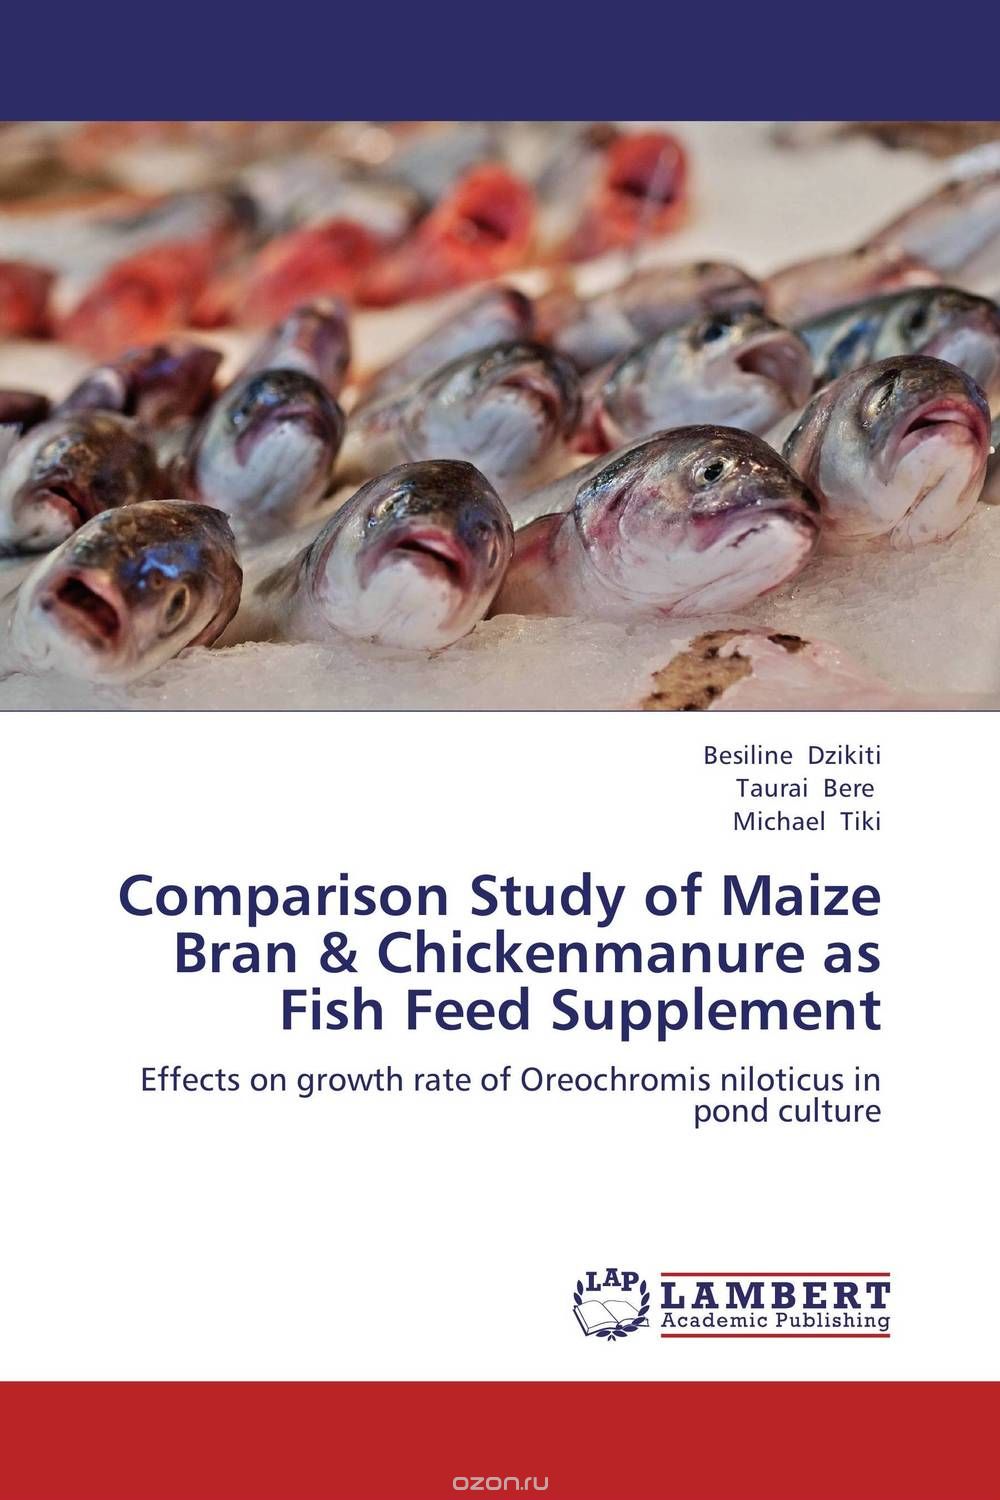 Comparison Study of Maize Bran & Chickenmanure as Fish Feed Supplement